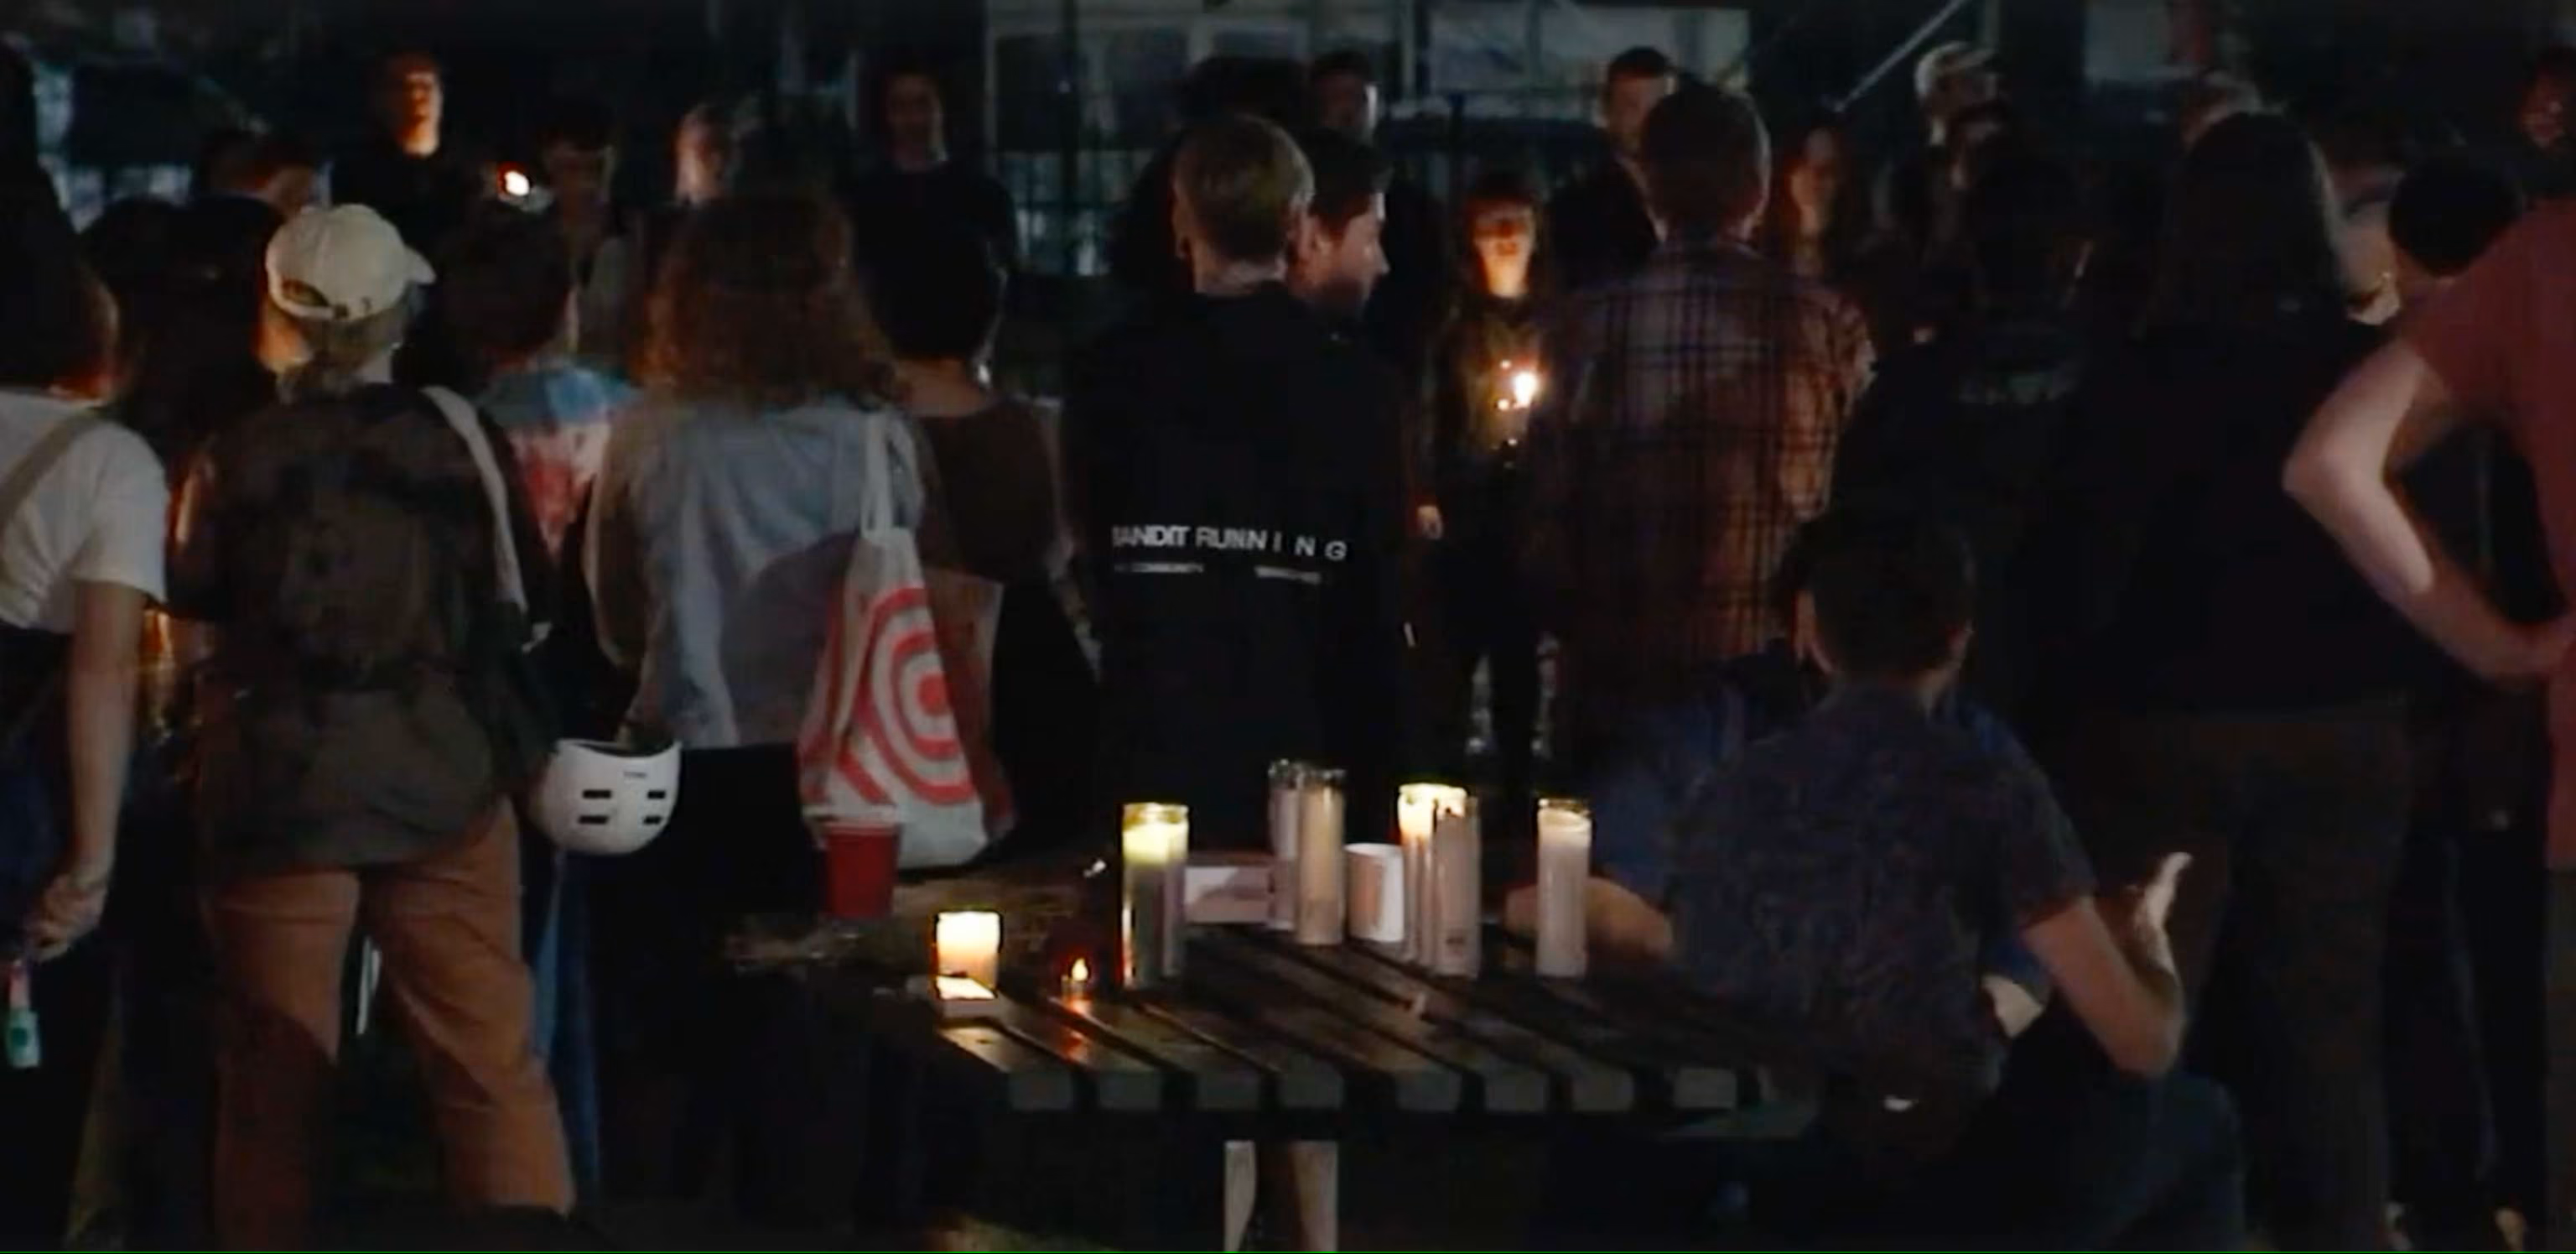 A vigil was held in honour of Ryan Carson’s passing that evening